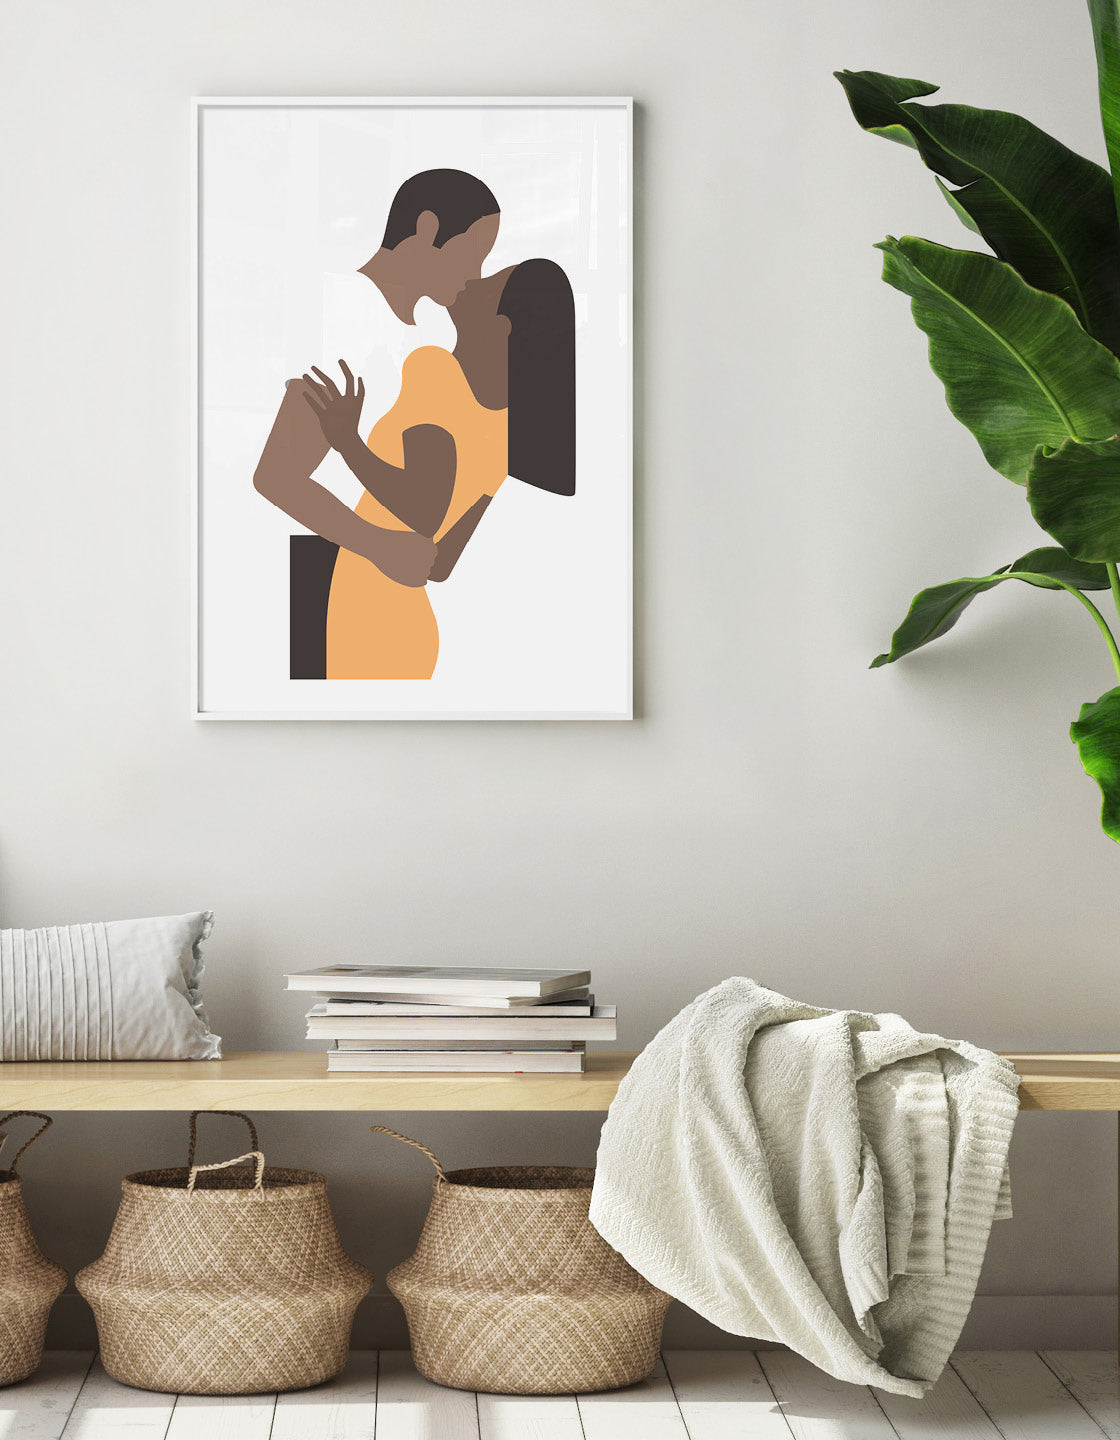 White poster print depicts a couple in an embrace kissing. The woman is on the right wearing a yellow dress and the man's white t-shirt blends with the background